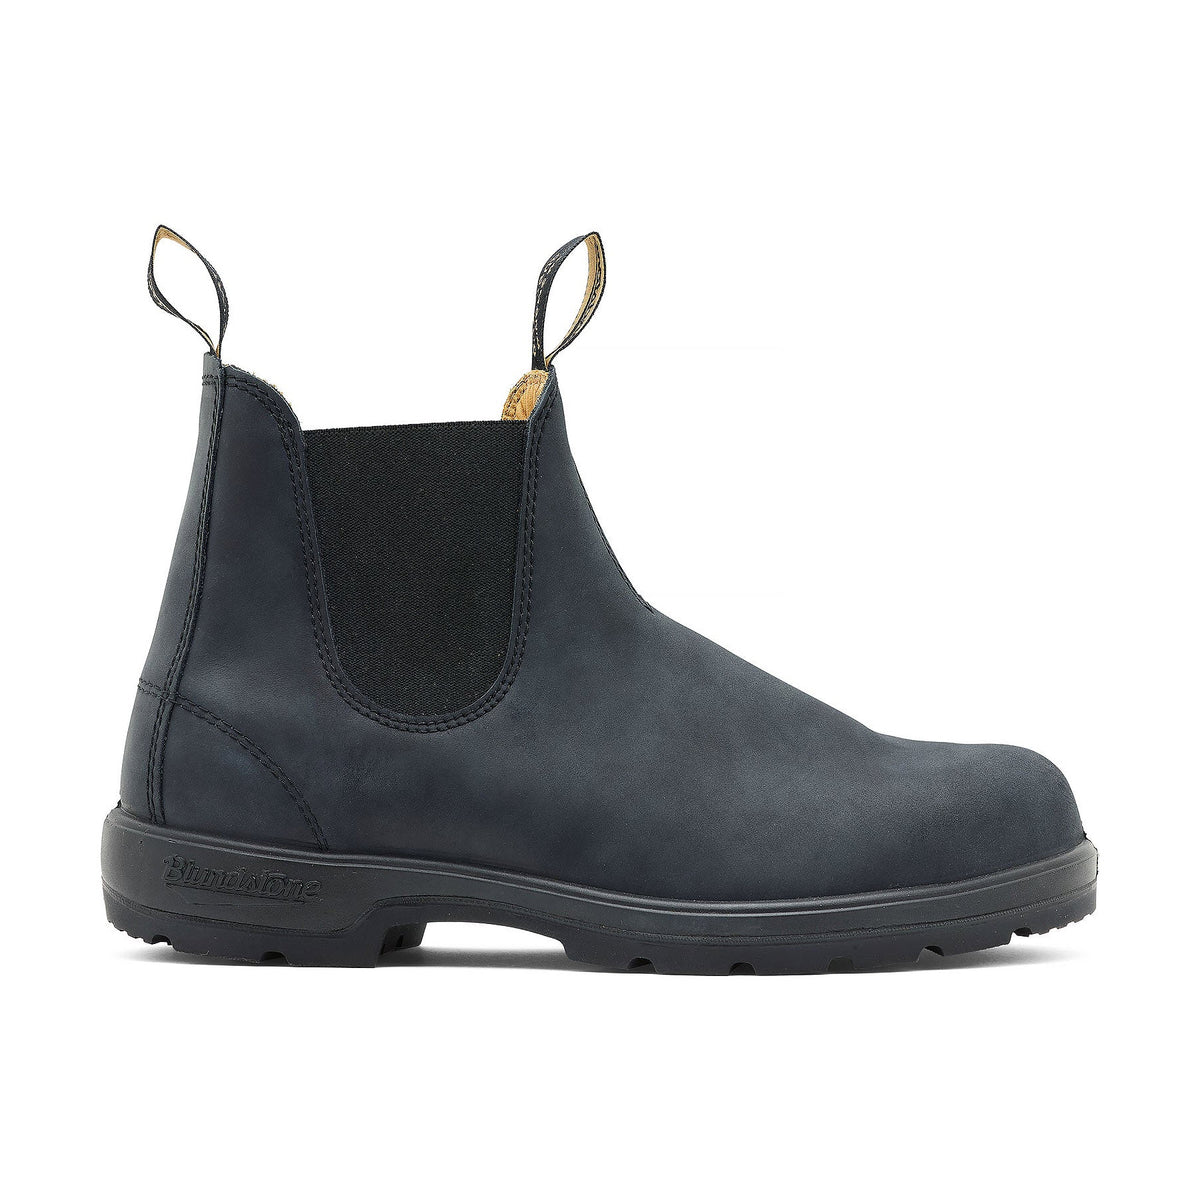 Blundstone Rustic Black Leather Chelsea boot with pull tabs and a thermo-urethane outsole.